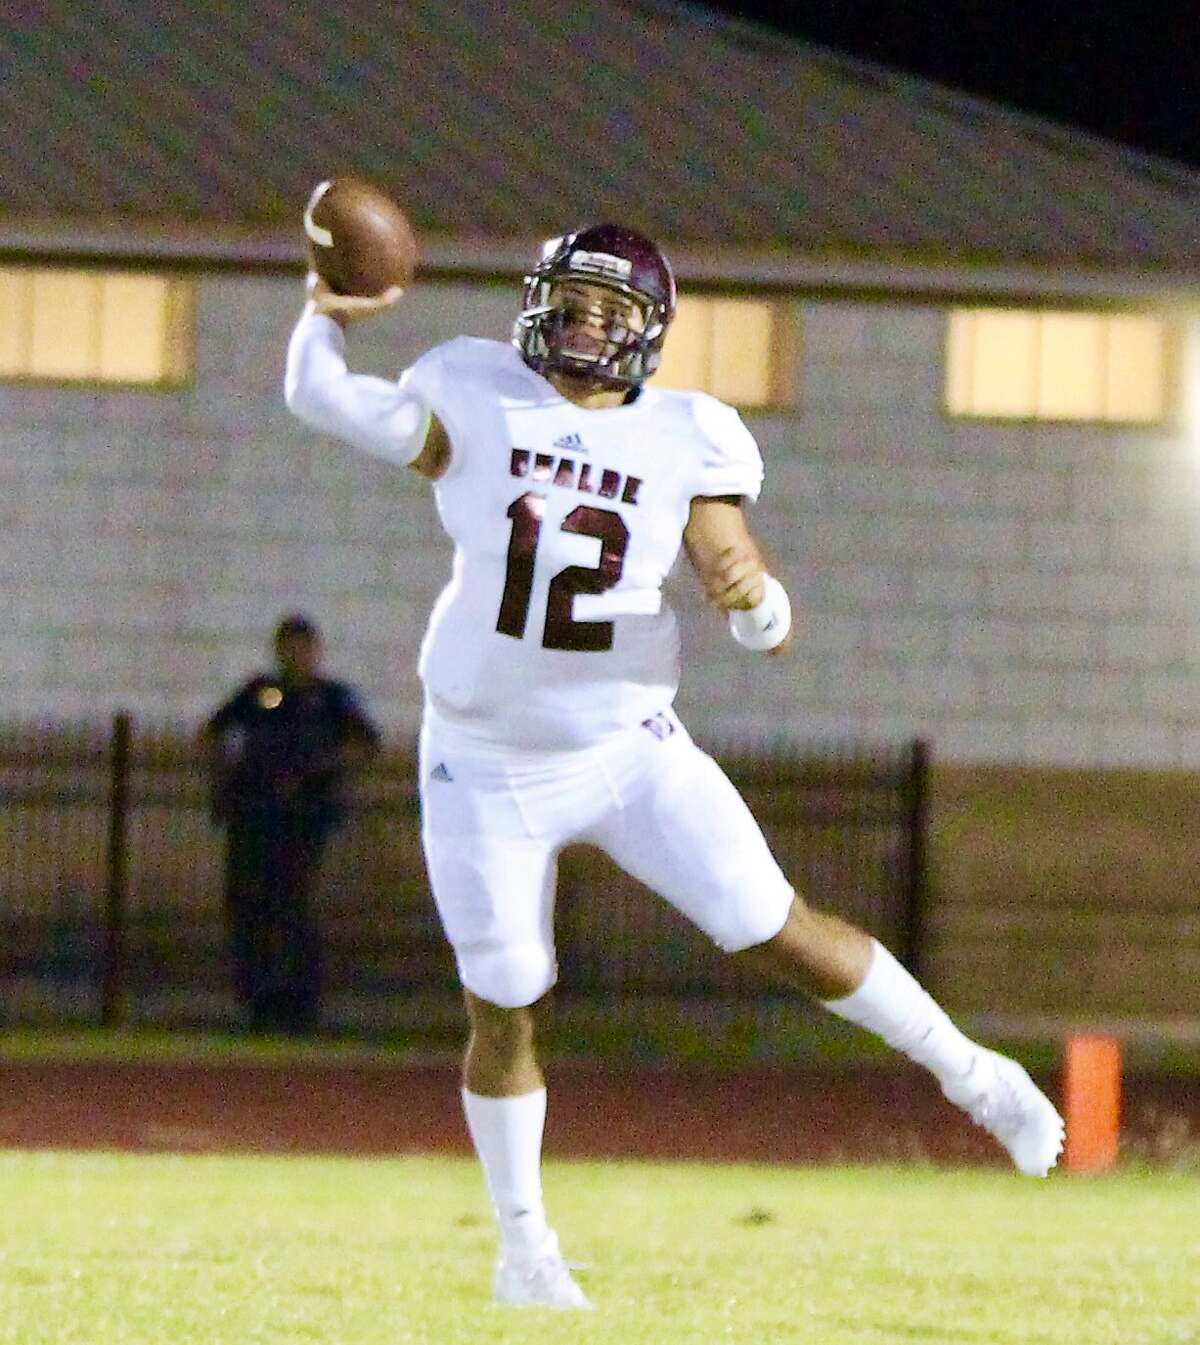 Michael Mata - Uvalde Coyotes, Sr. Mata was the area’s top passer in yardage, completing 195 of 367 passes for 3,150 yards with 29 touchdowns and 13 interceptions.